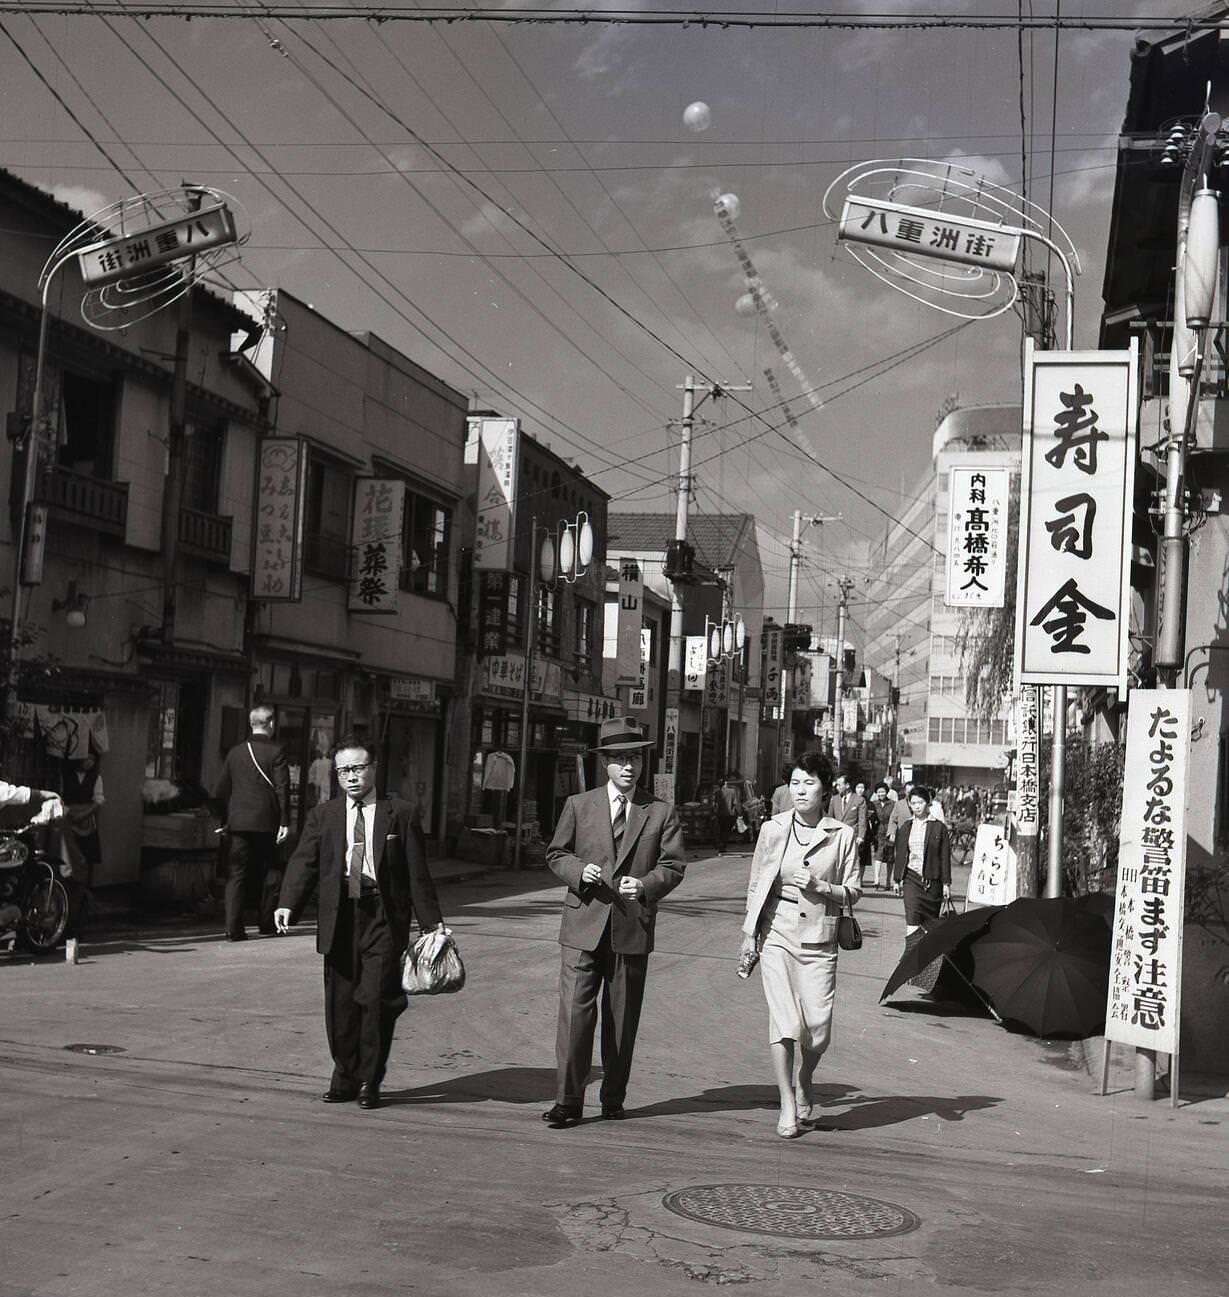 Two businessmen and a lady walking through the old town district of Tokyo, 1950s.